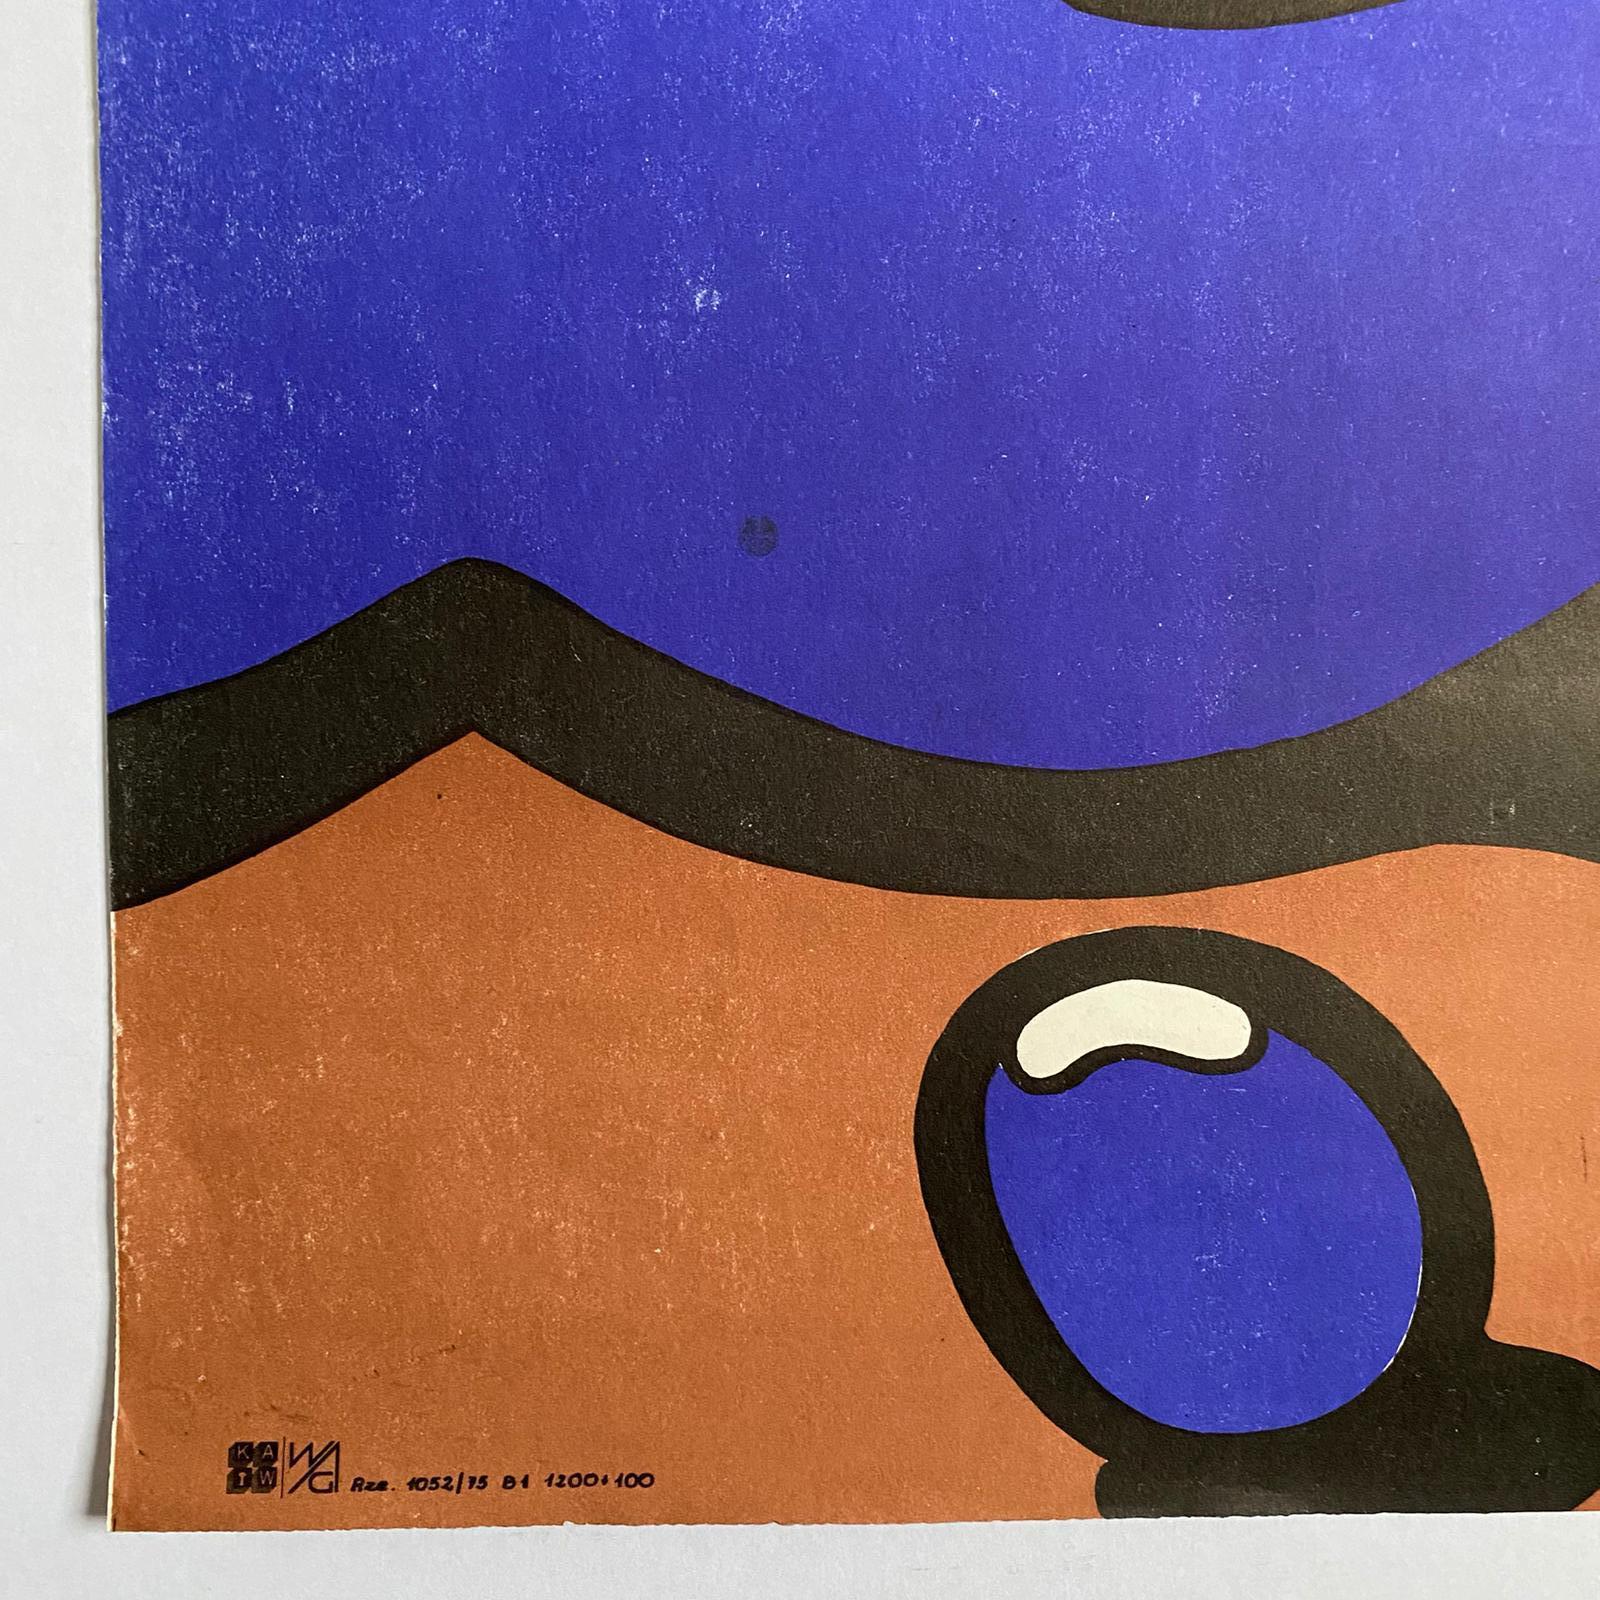 Here’s another very collectible original 1975 vintage Polish poster ‘Warsaw Autumn’ (Warszawska Jesien) by the legendary Jan Mlodozeniec. He designed it for the 19th International Festival of Contemporary Music. We absolutely adore the incredible